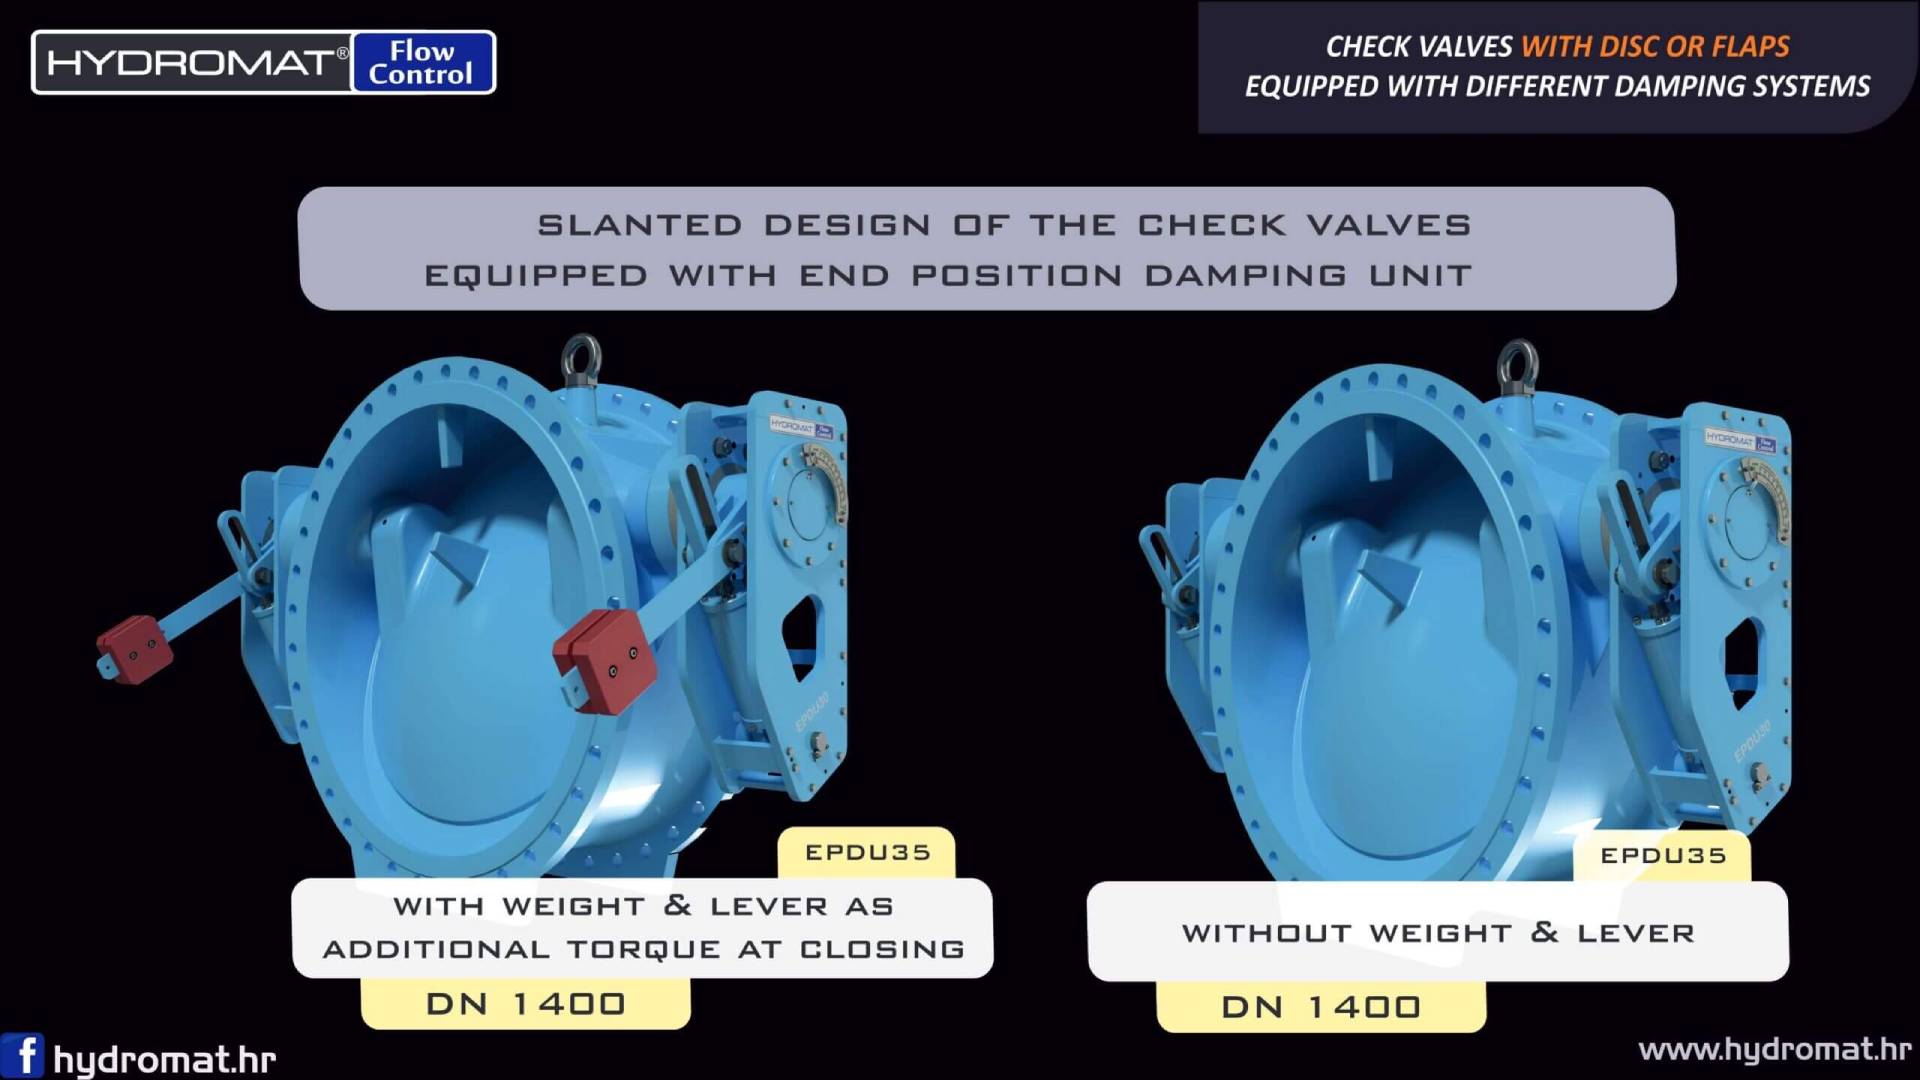 hydromat's check valves with flaps and disk